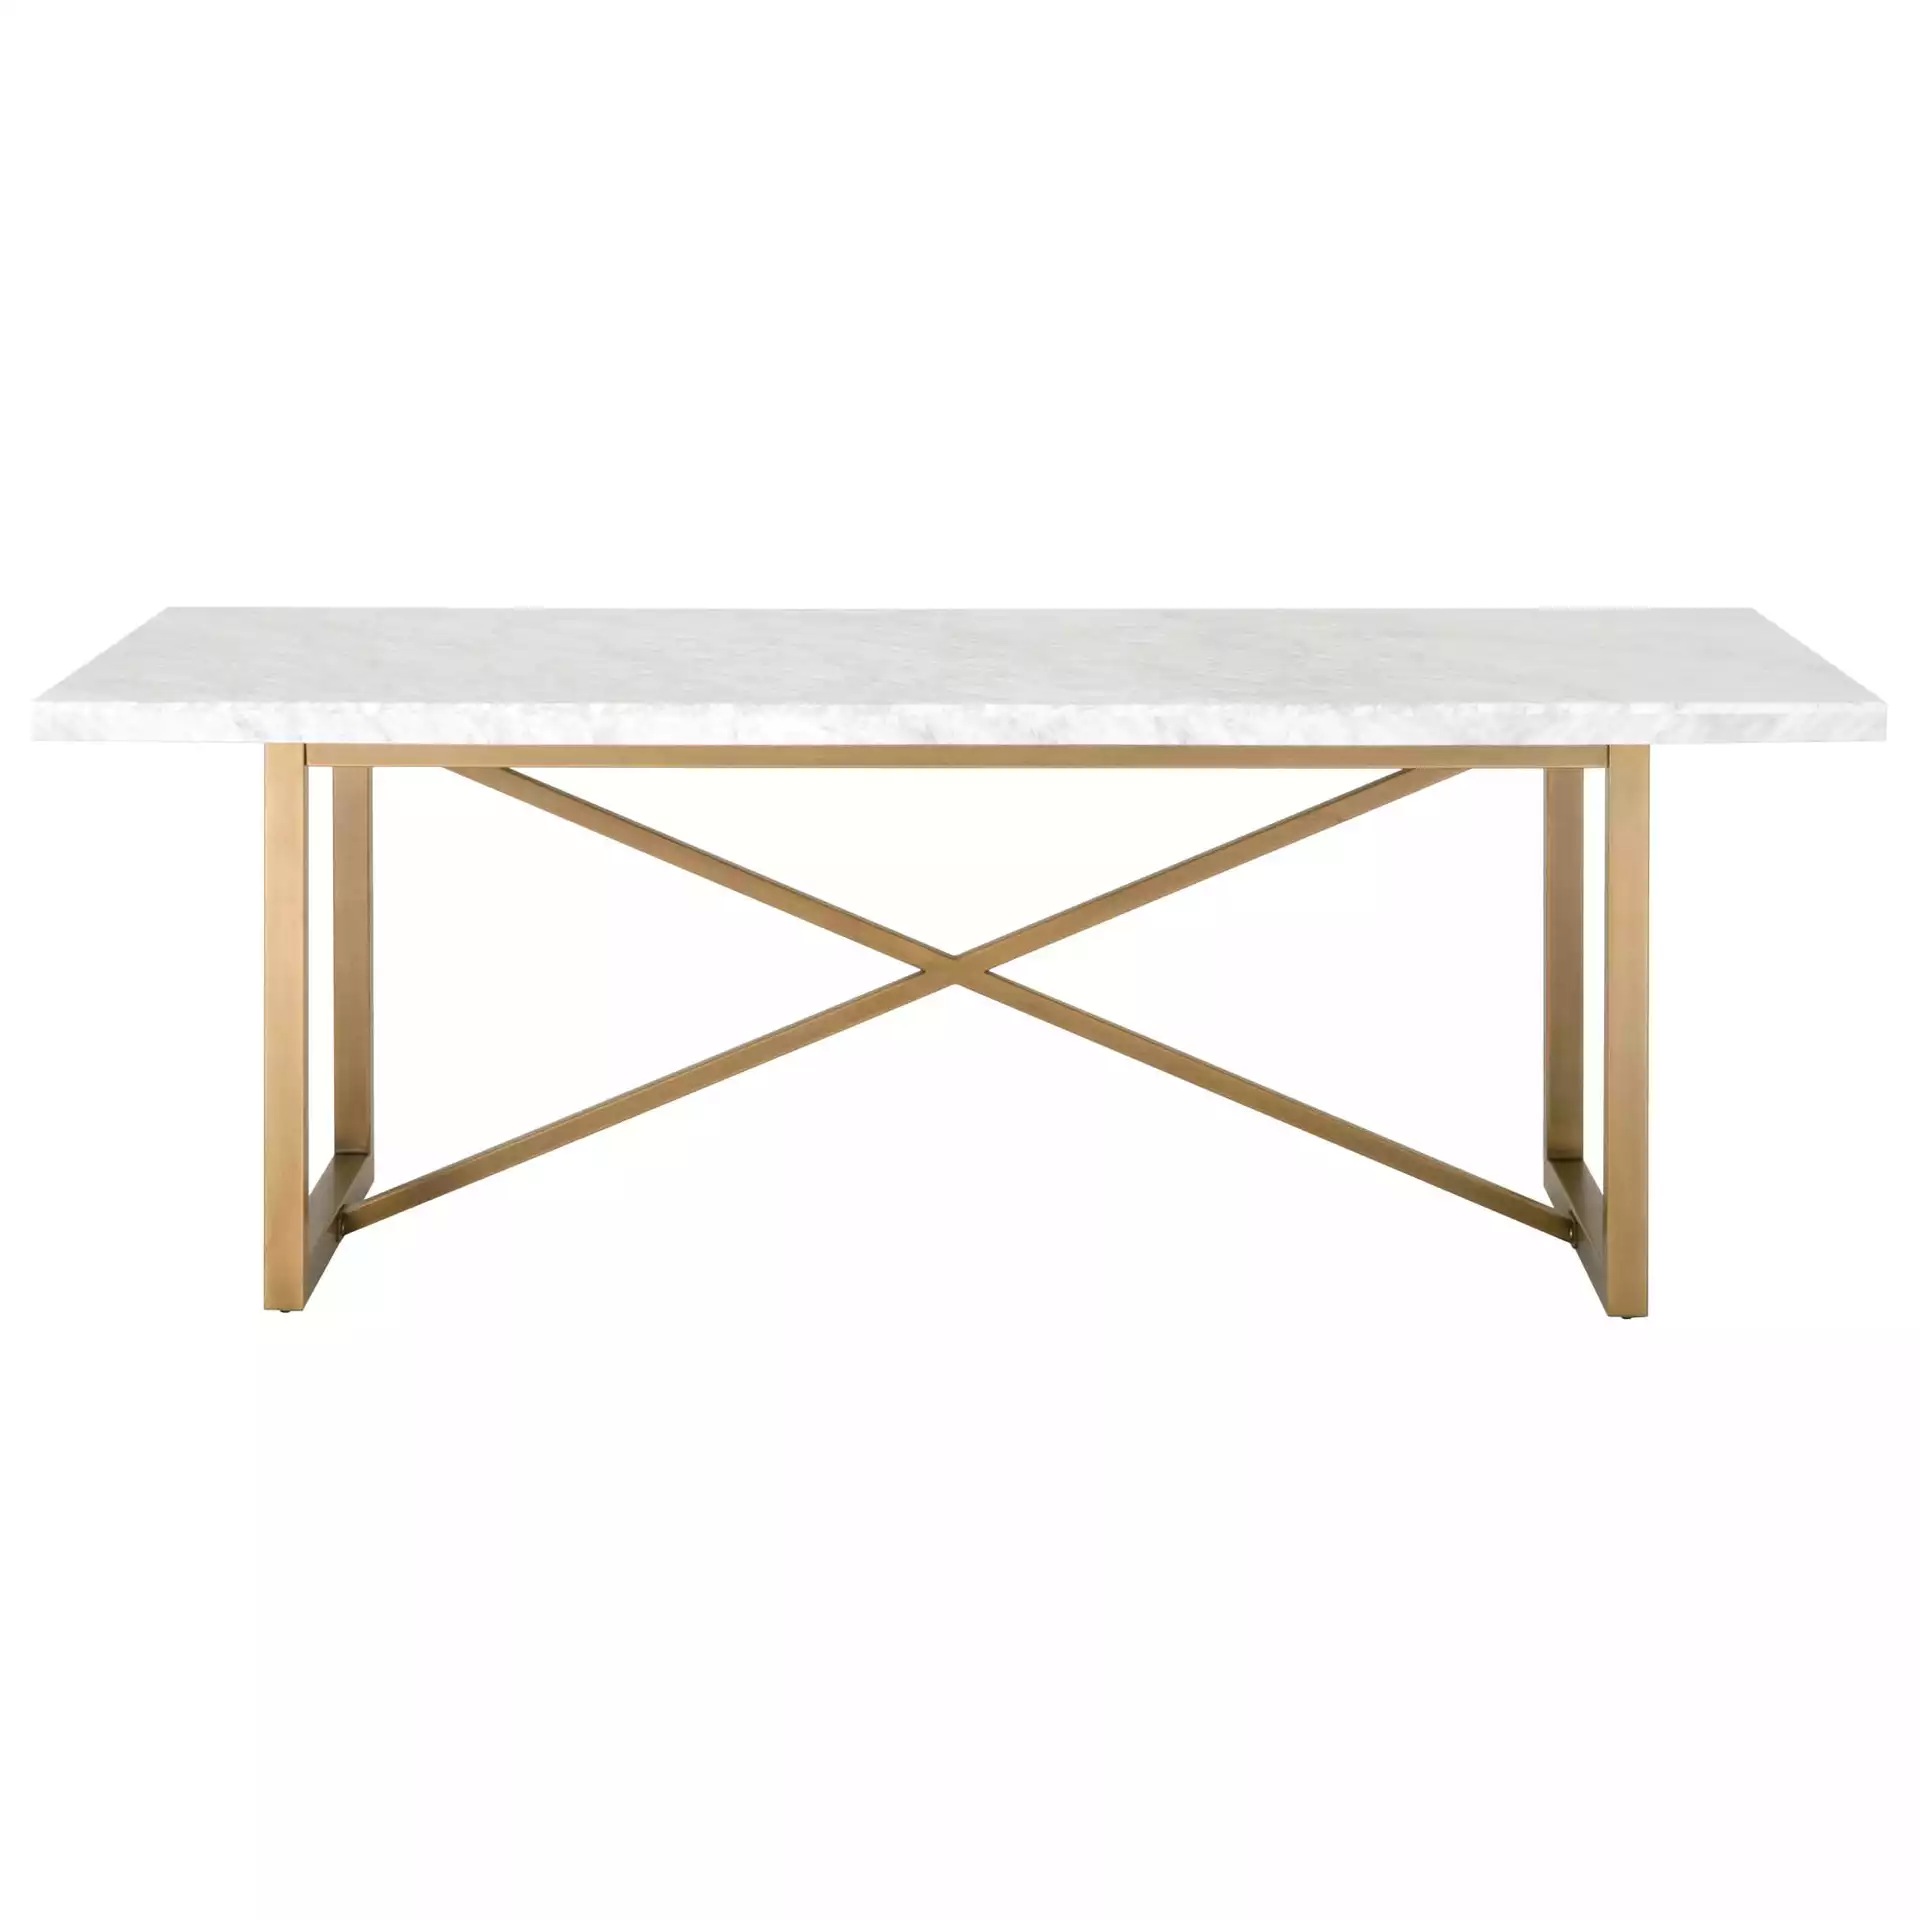 Carrera Dining Table, White & Gold